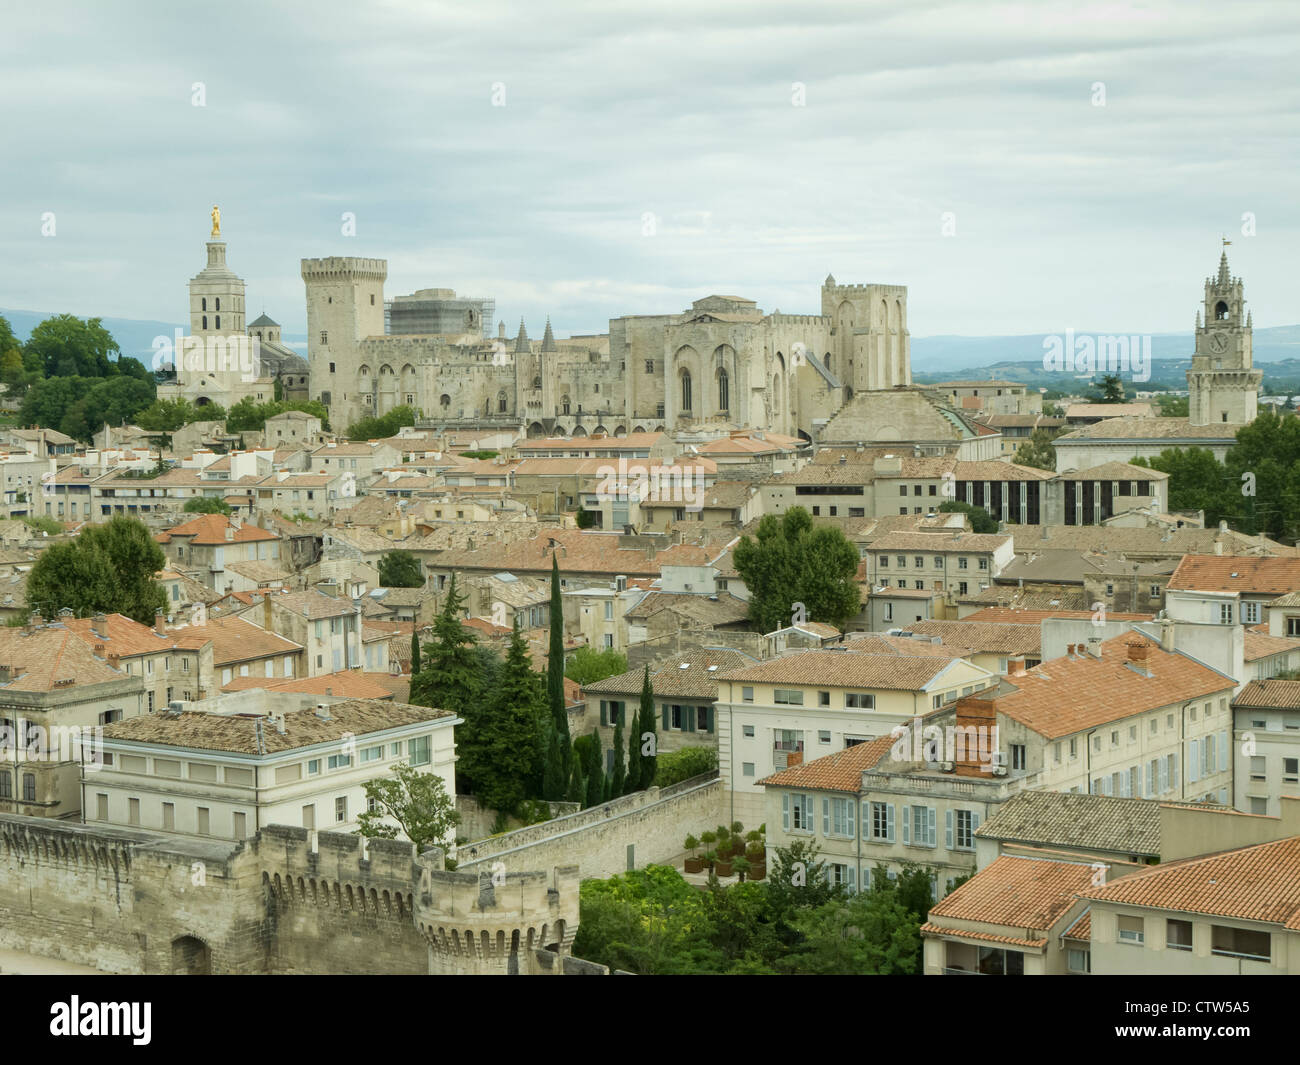 The historic city of Avignon in south France, showing the papal palace. August 2011. Stock Photo